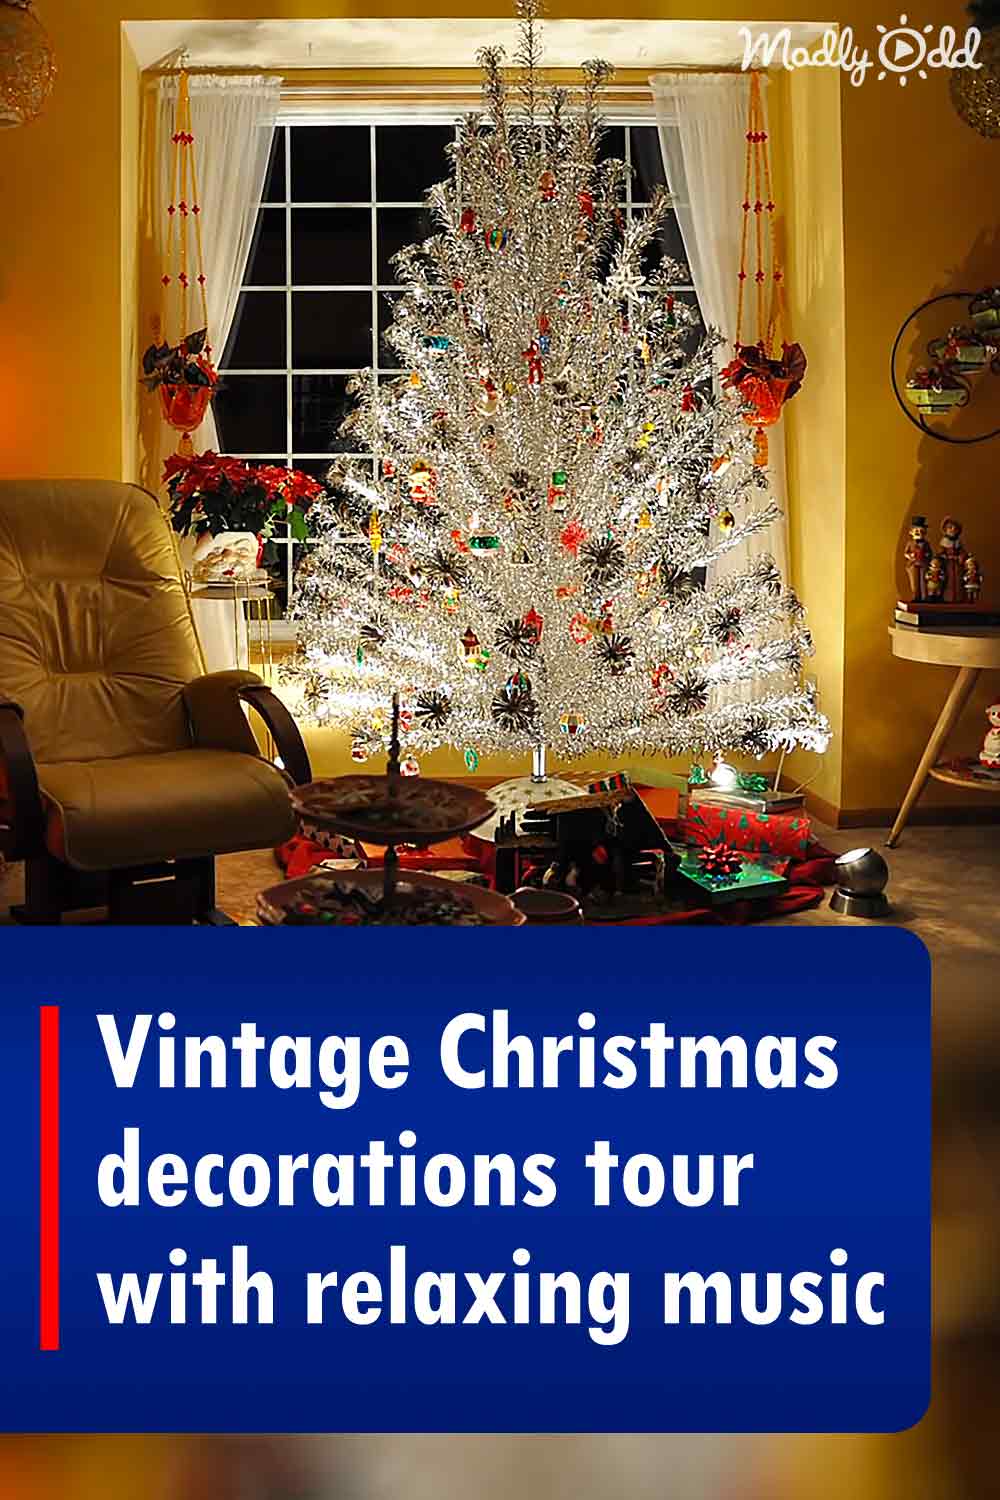 Vintage Christmas decorations tour with relaxing music